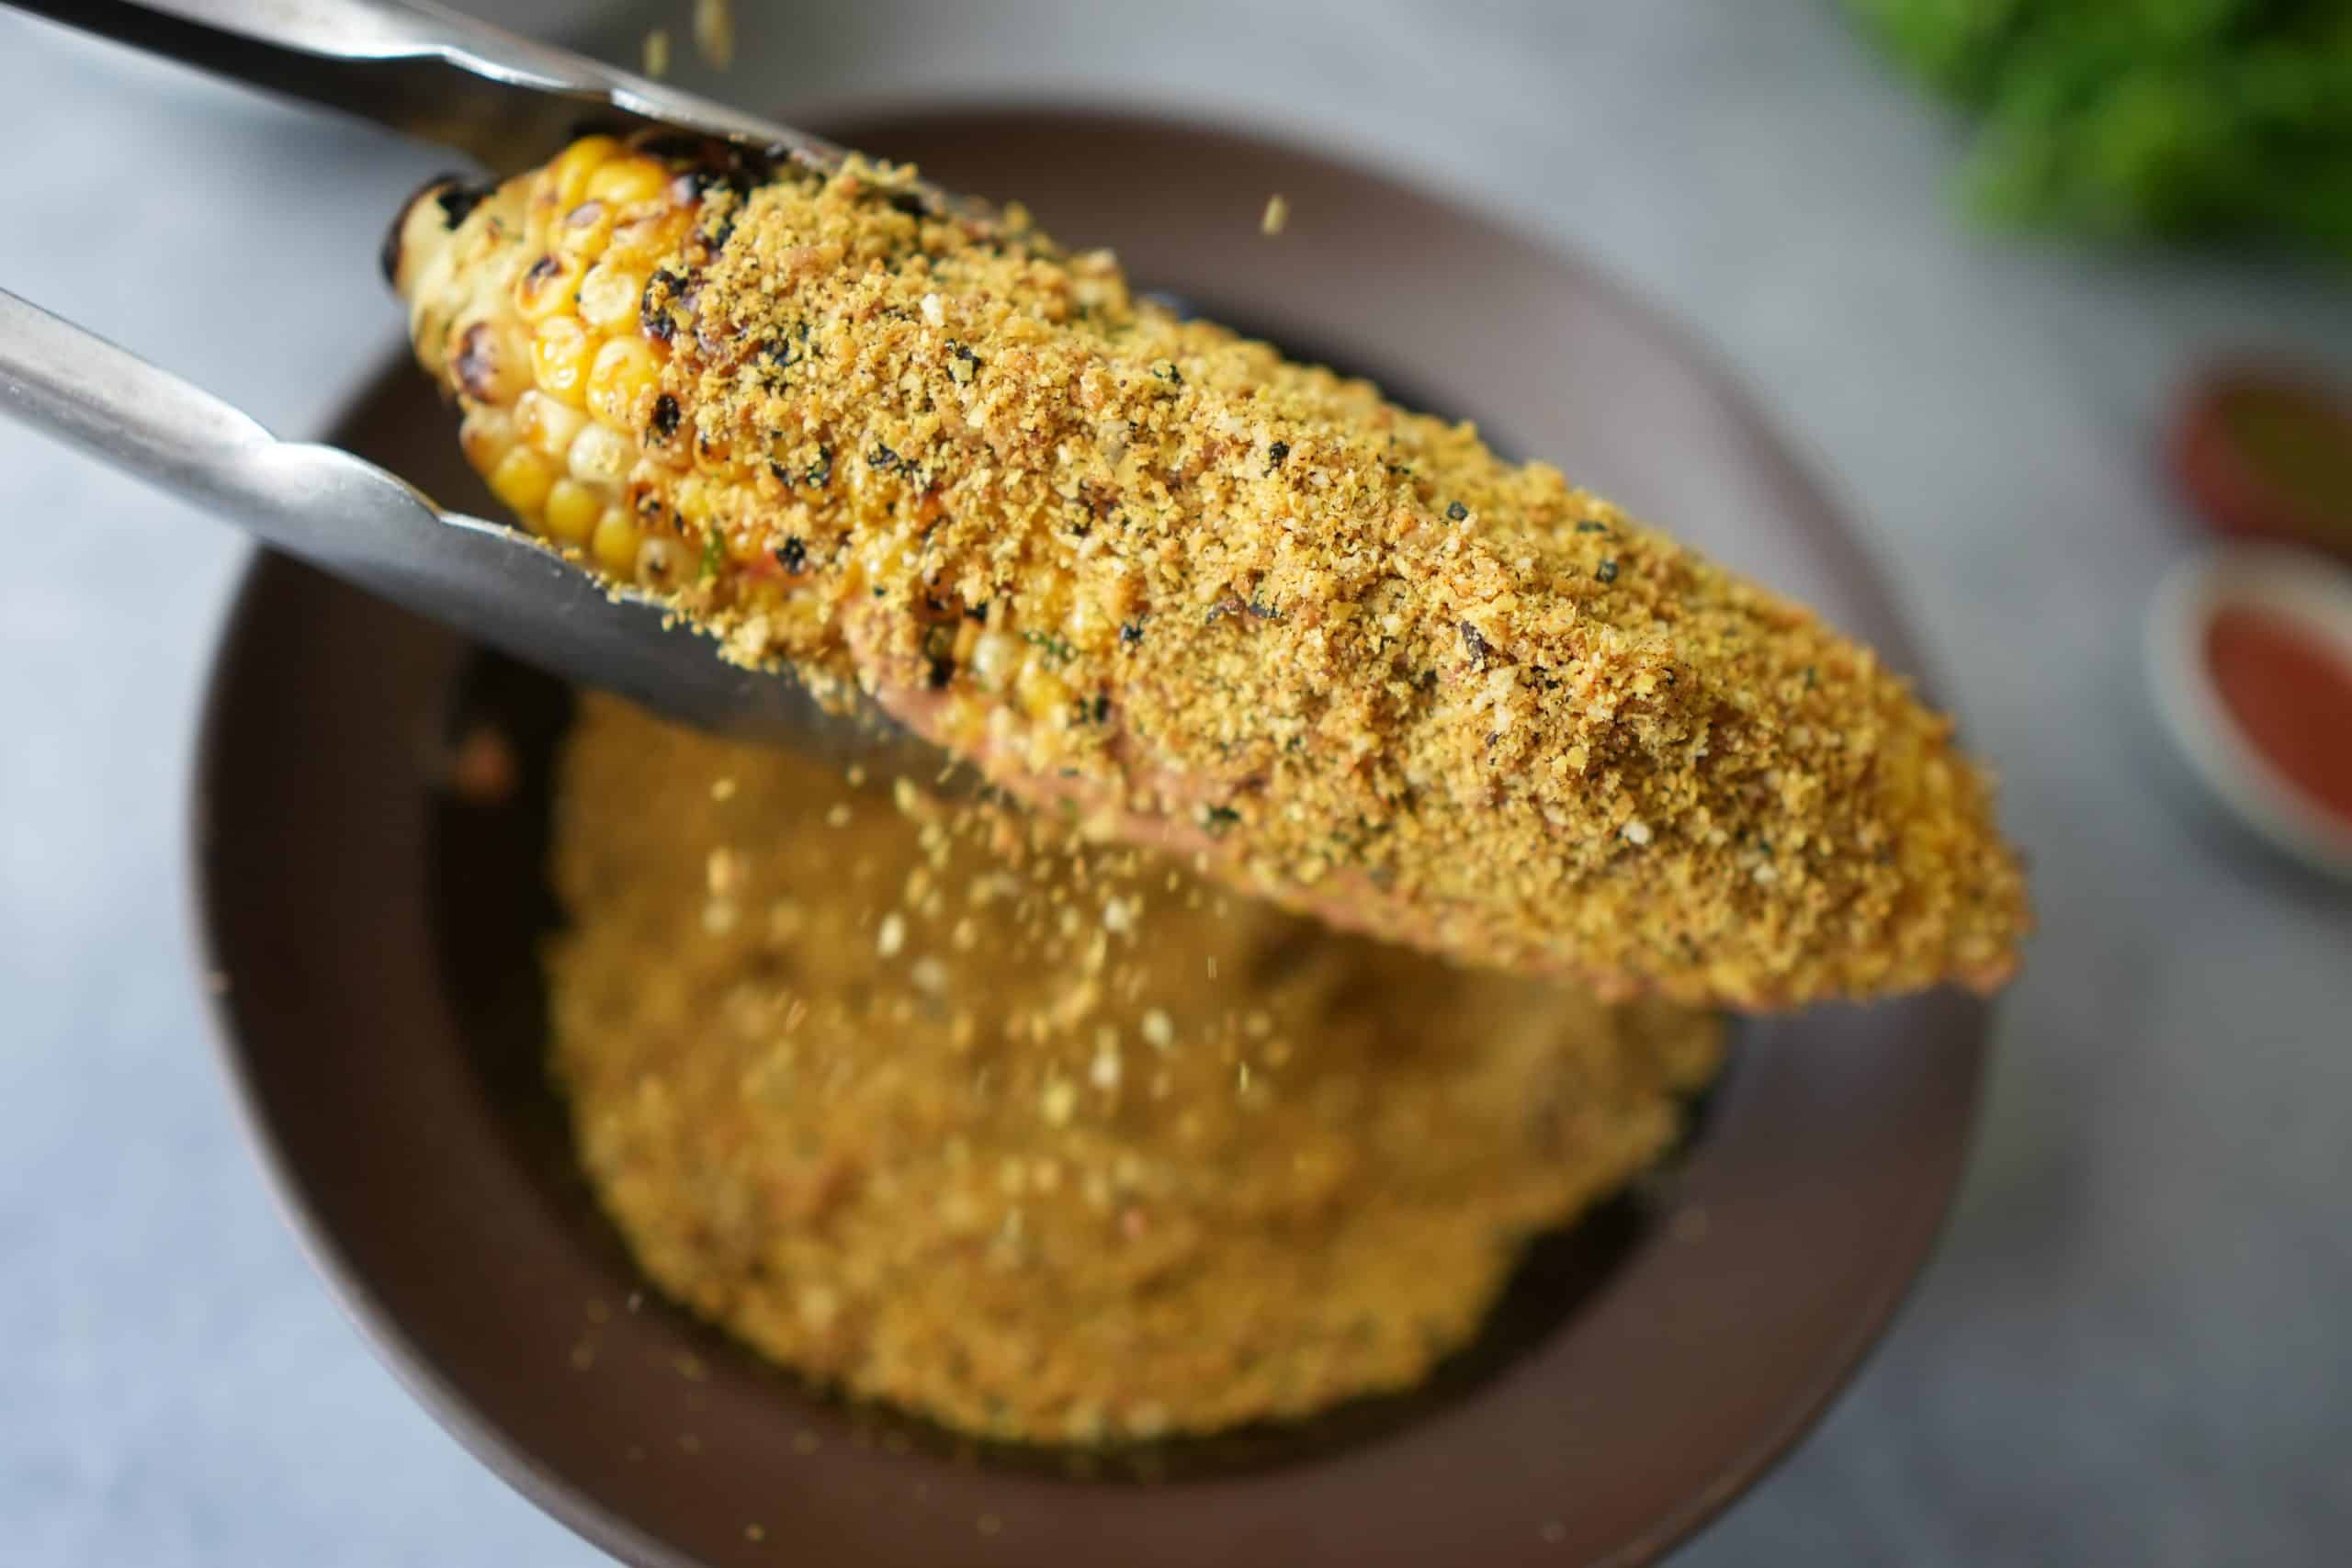 vegan elote getting coated with brazil nut cheese coating over a bowl